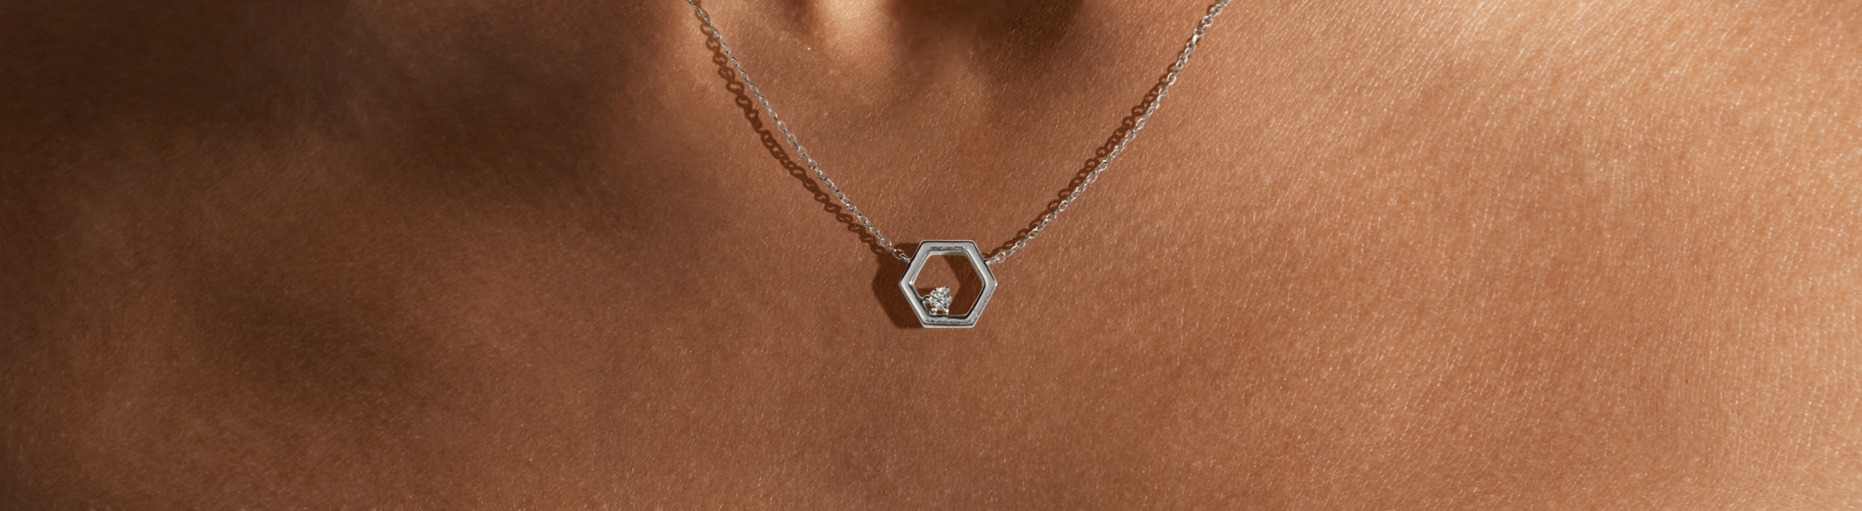 Solitaire Honeycomb Necklace in Sterling Silver